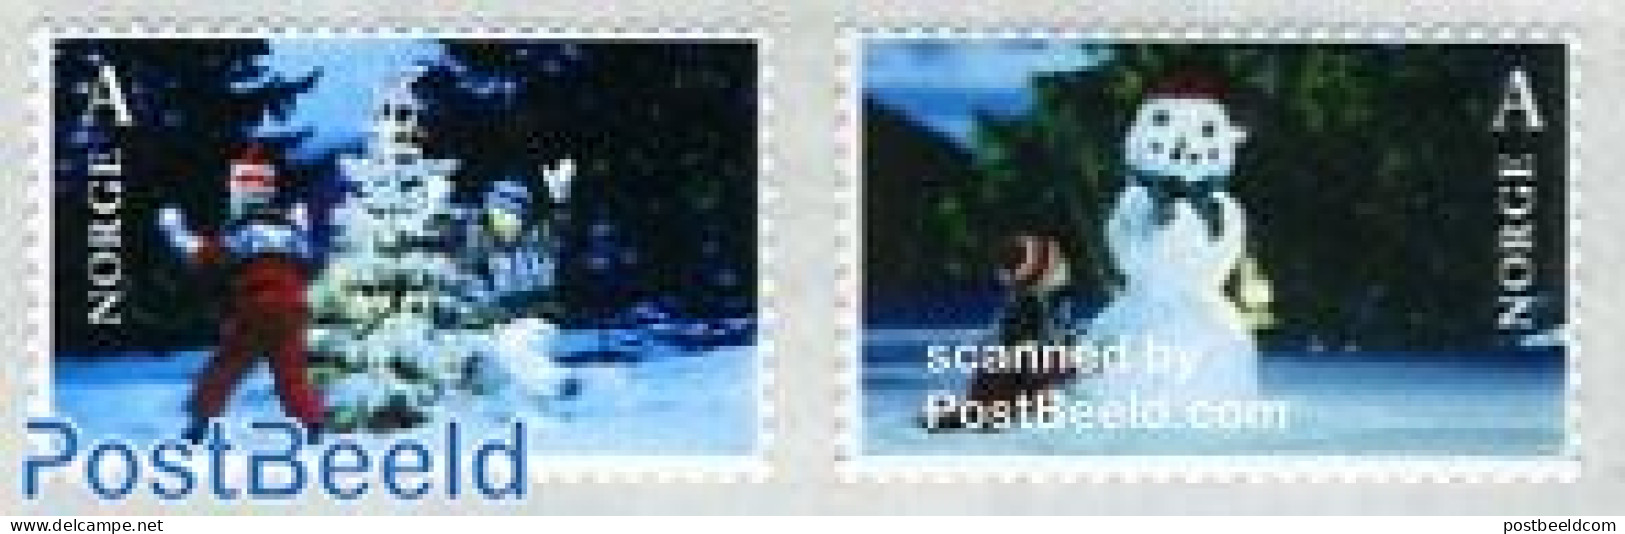 Norway 2006 Christmas 2v S-a (from Booklets), Mint NH, Religion - Christmas - Nuovi